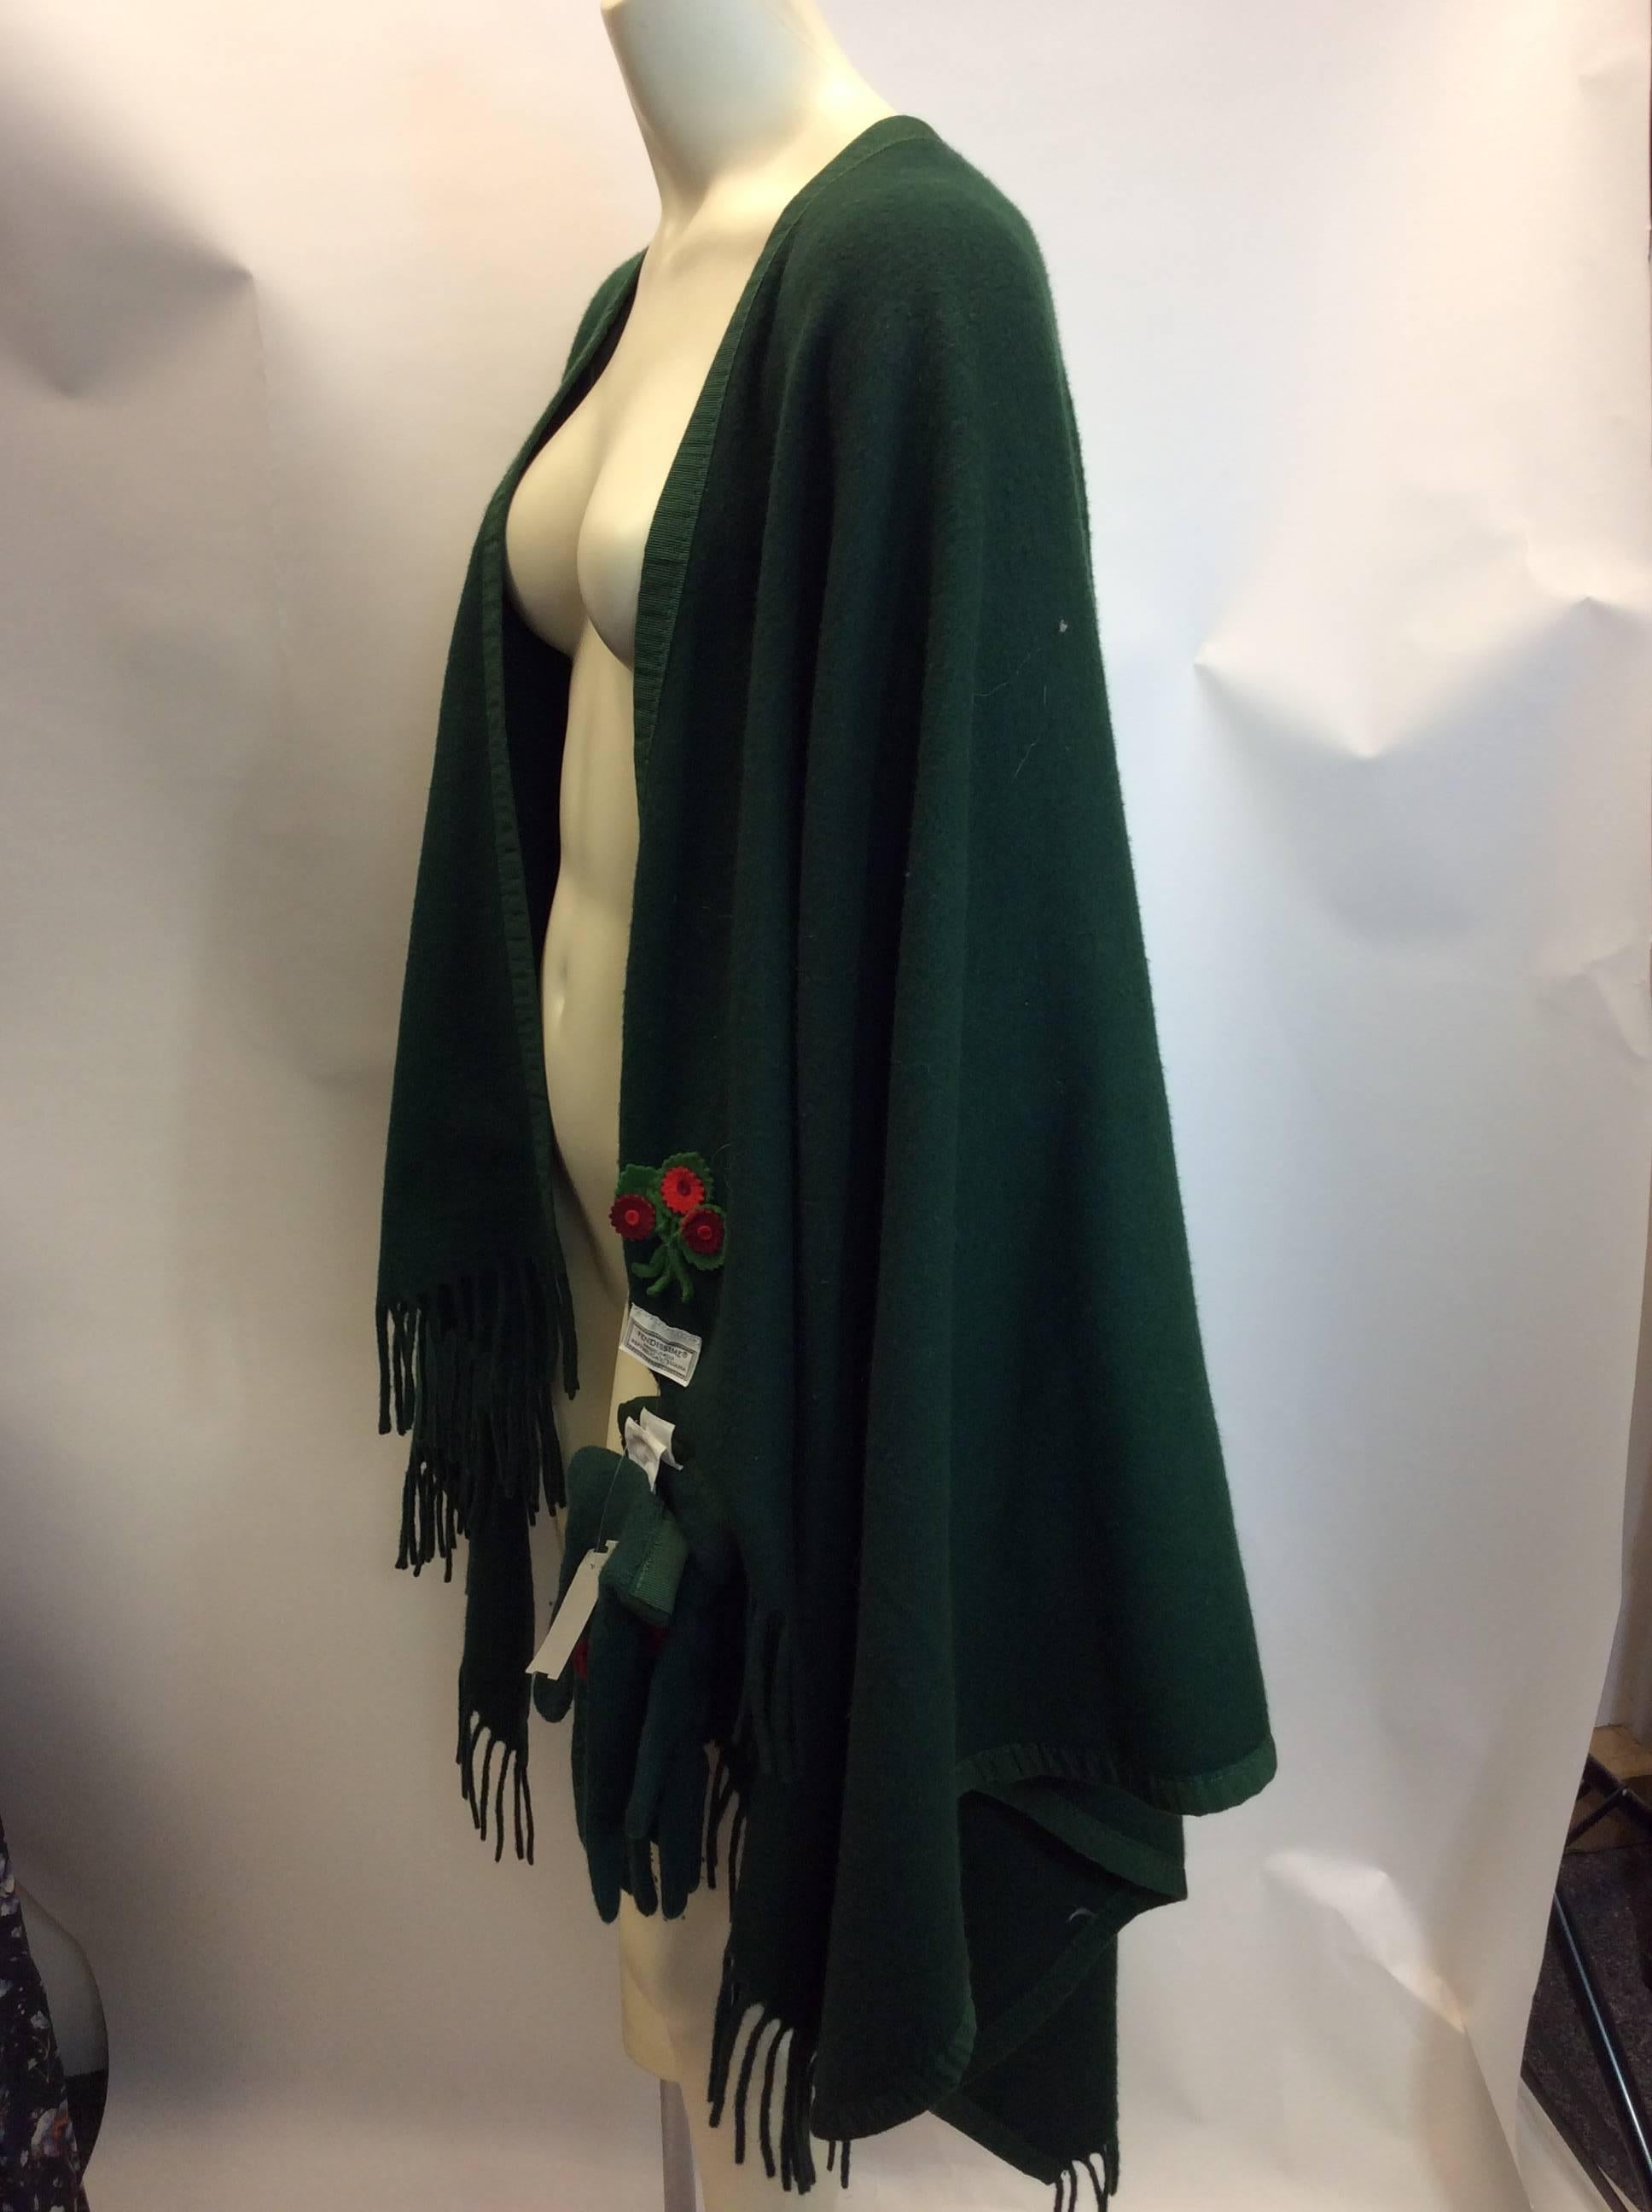 Fendi Evergreen Wool Fringe Cape With Gloves
Made in Italy
Rosette applique on gloves and cape
Fringe trim
Lambswool 
$400
34 inches short in the front, 44 inches at the longest point in the back